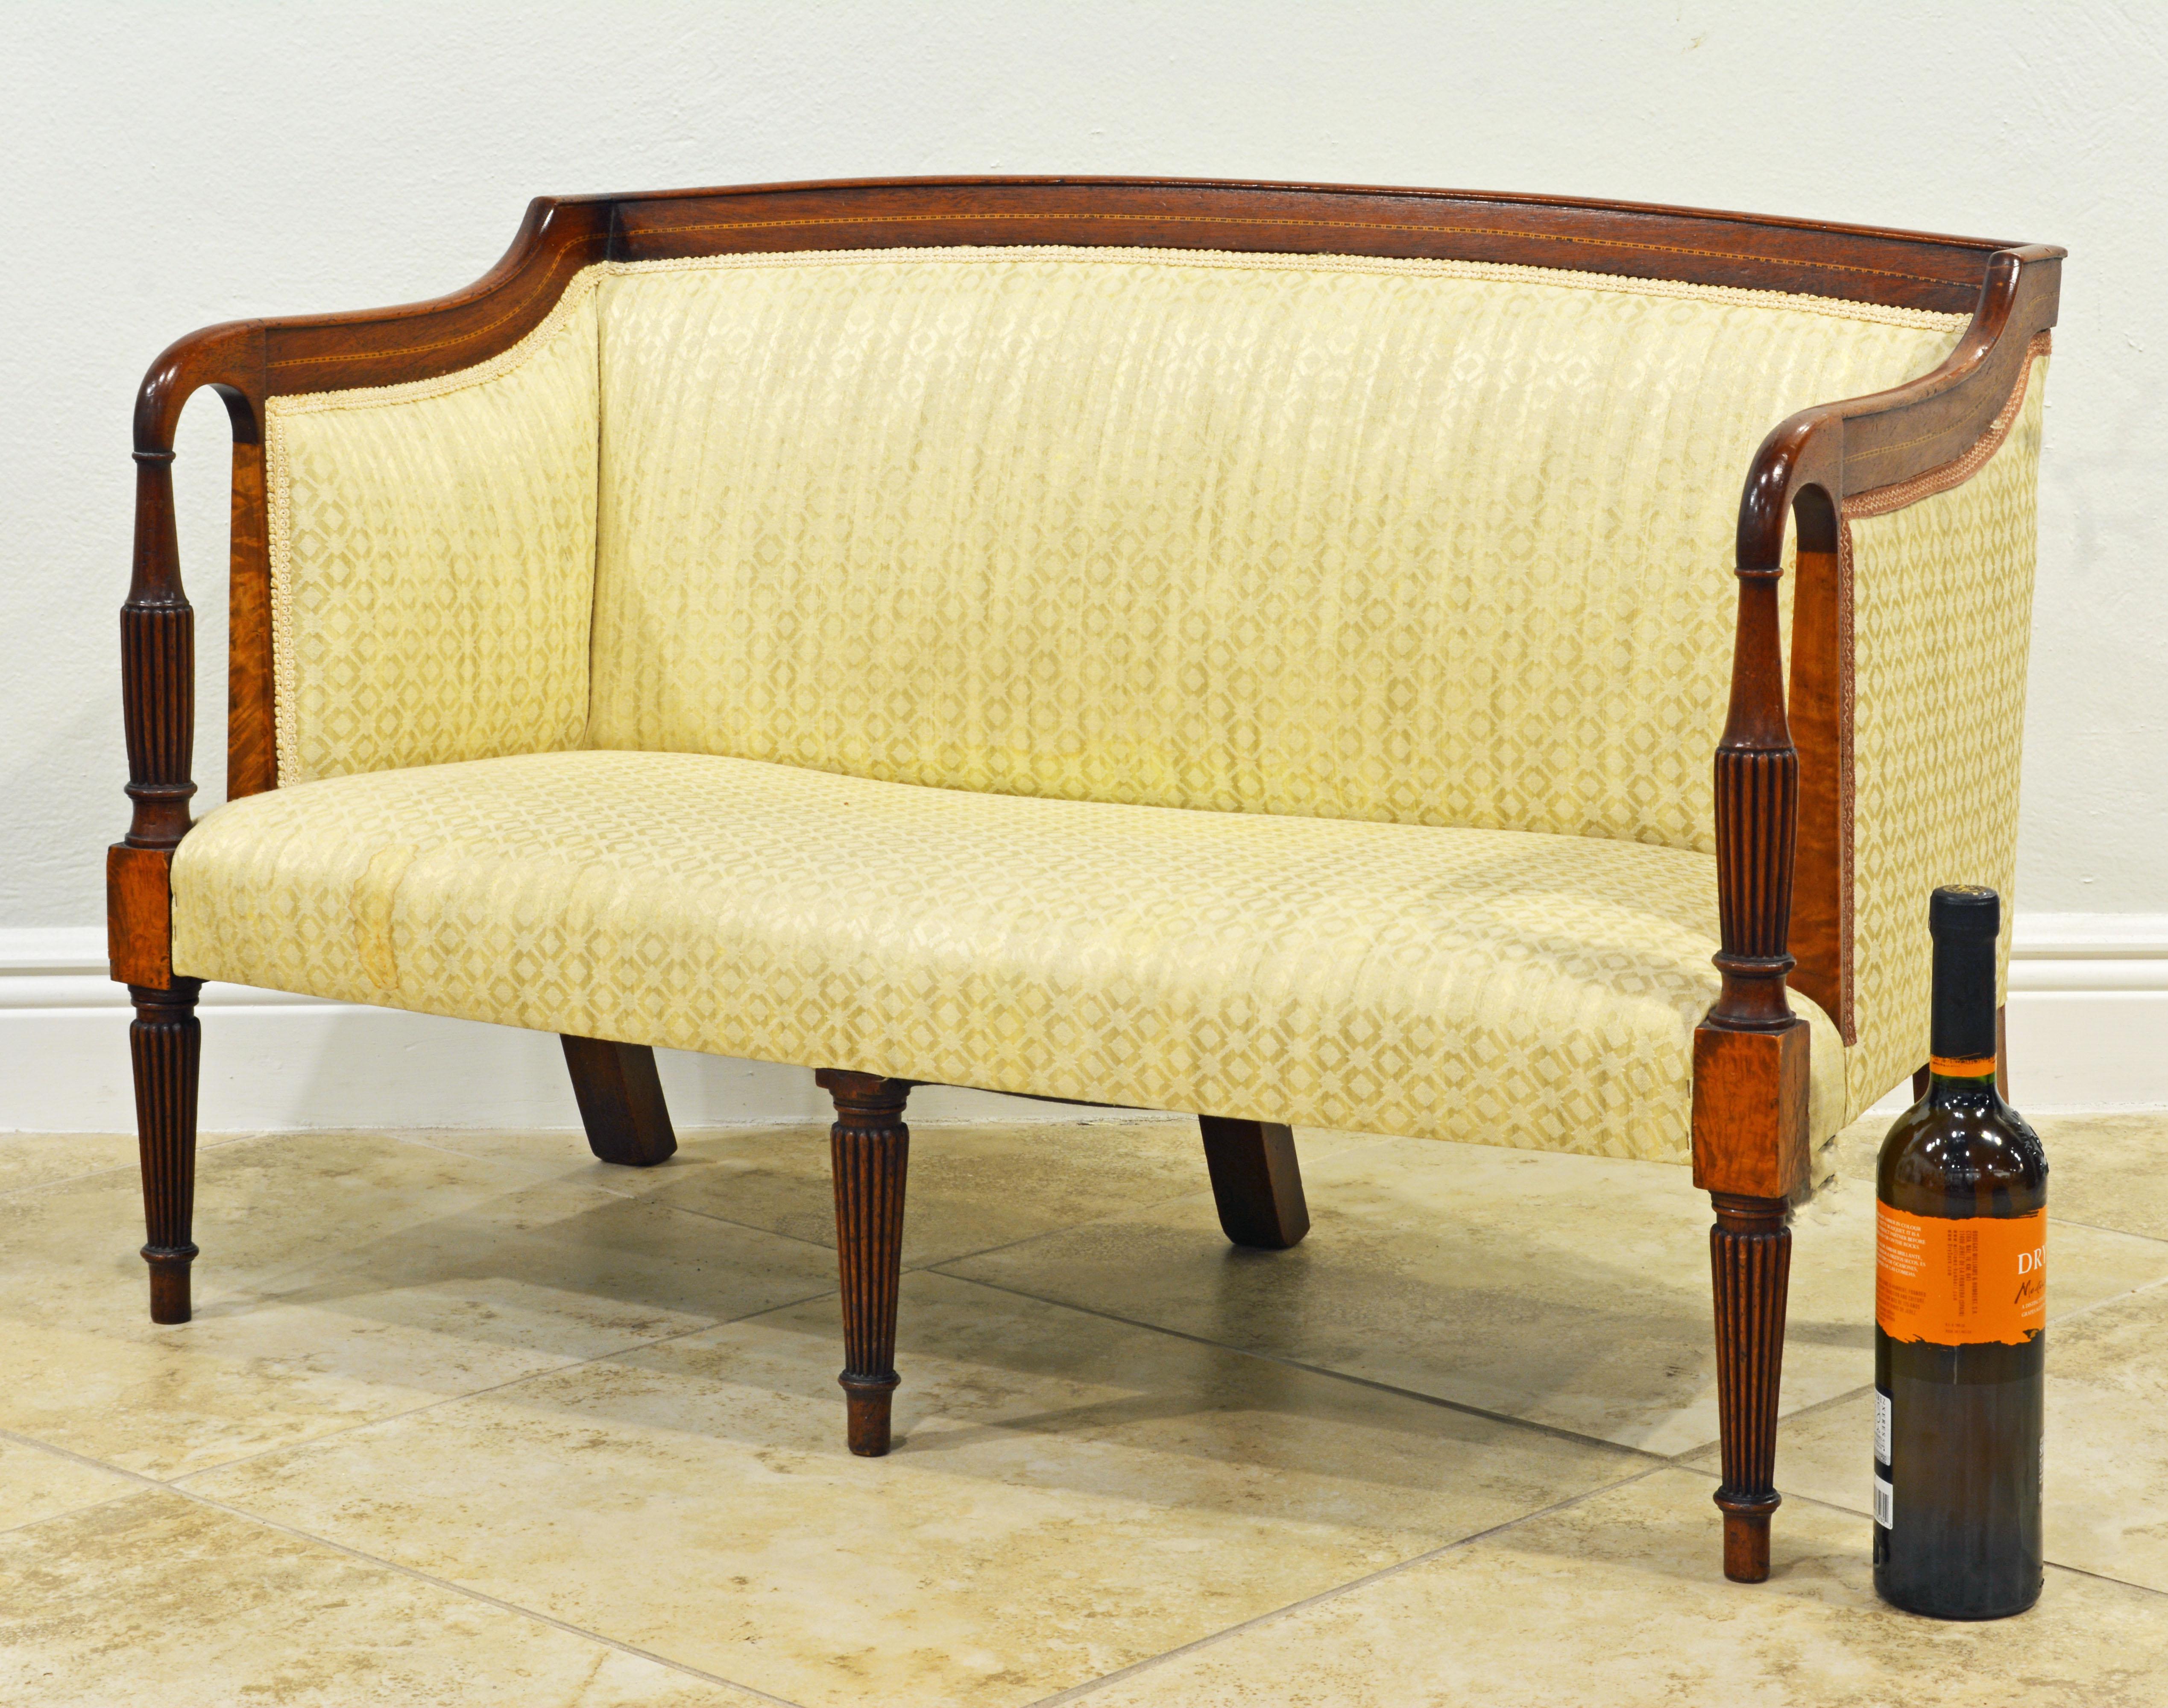 This charming diminutive English Sheraton style mahogany children's settee features a slightly arched and inlaid back and side rail continuing to the armrests terminating in bulbous reeded supports flowing into a block at the seat supported by three